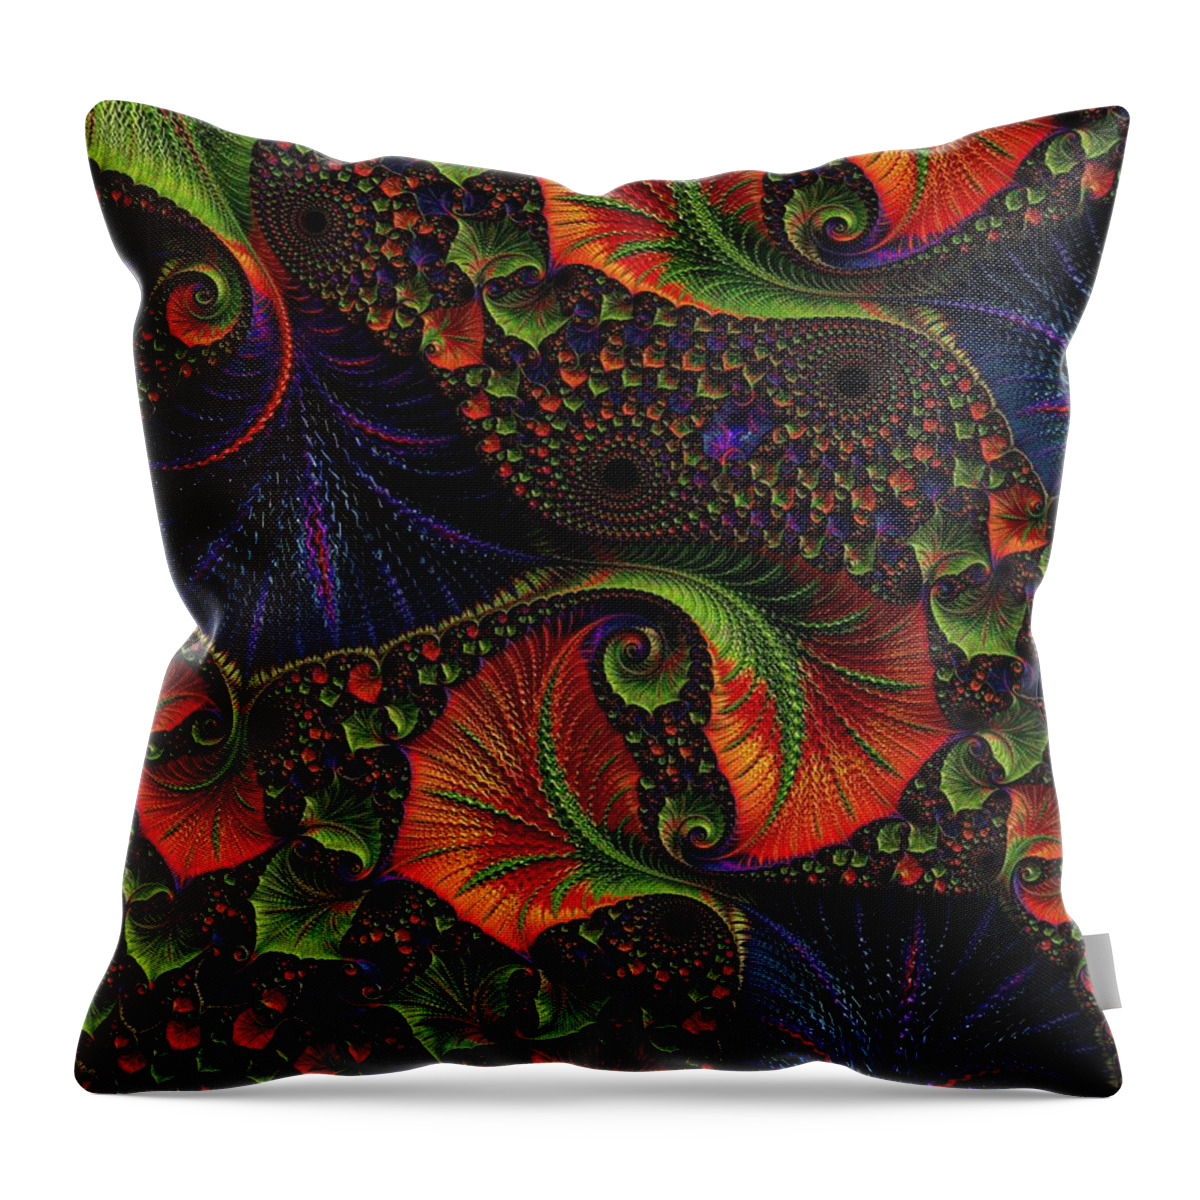 Digital Art Throw Pillow featuring the digital art Fractal Embroidery by Amanda Moore